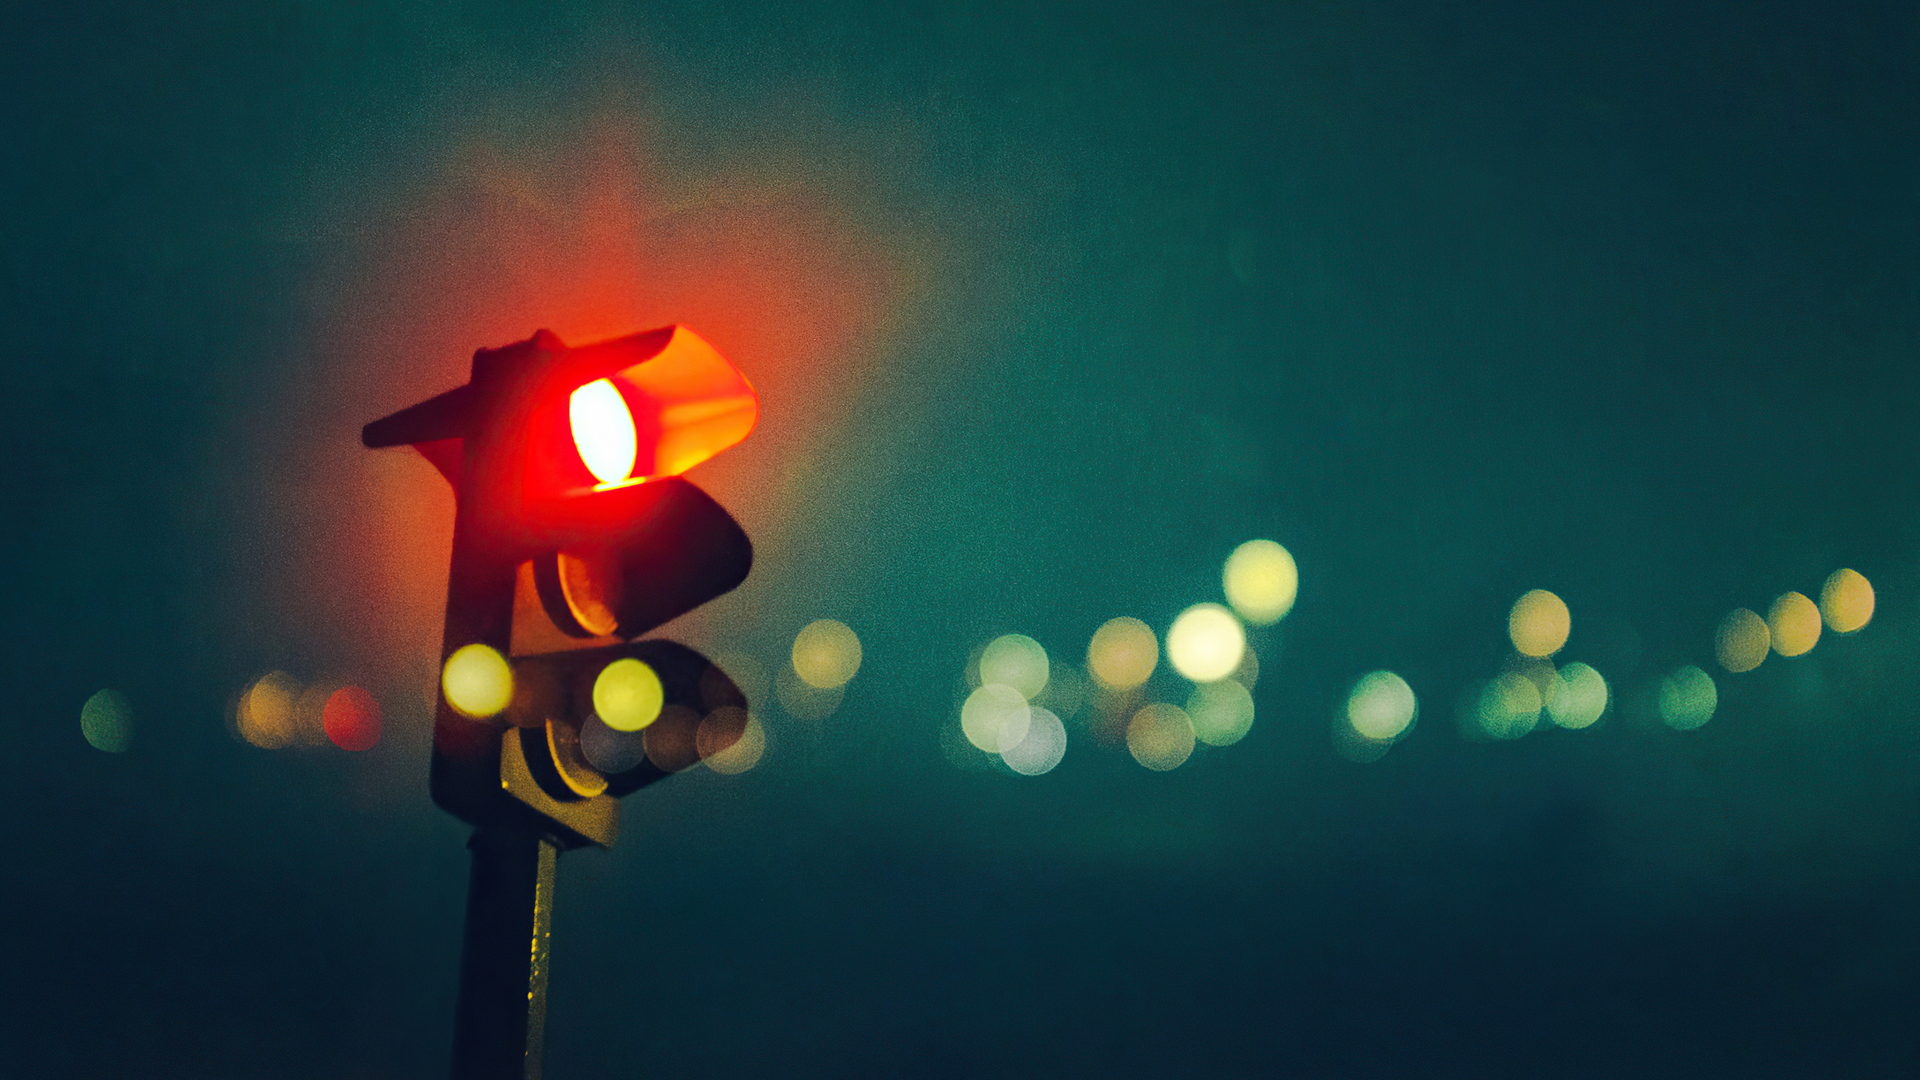 A traffic light with blurred lights in the background - Light red